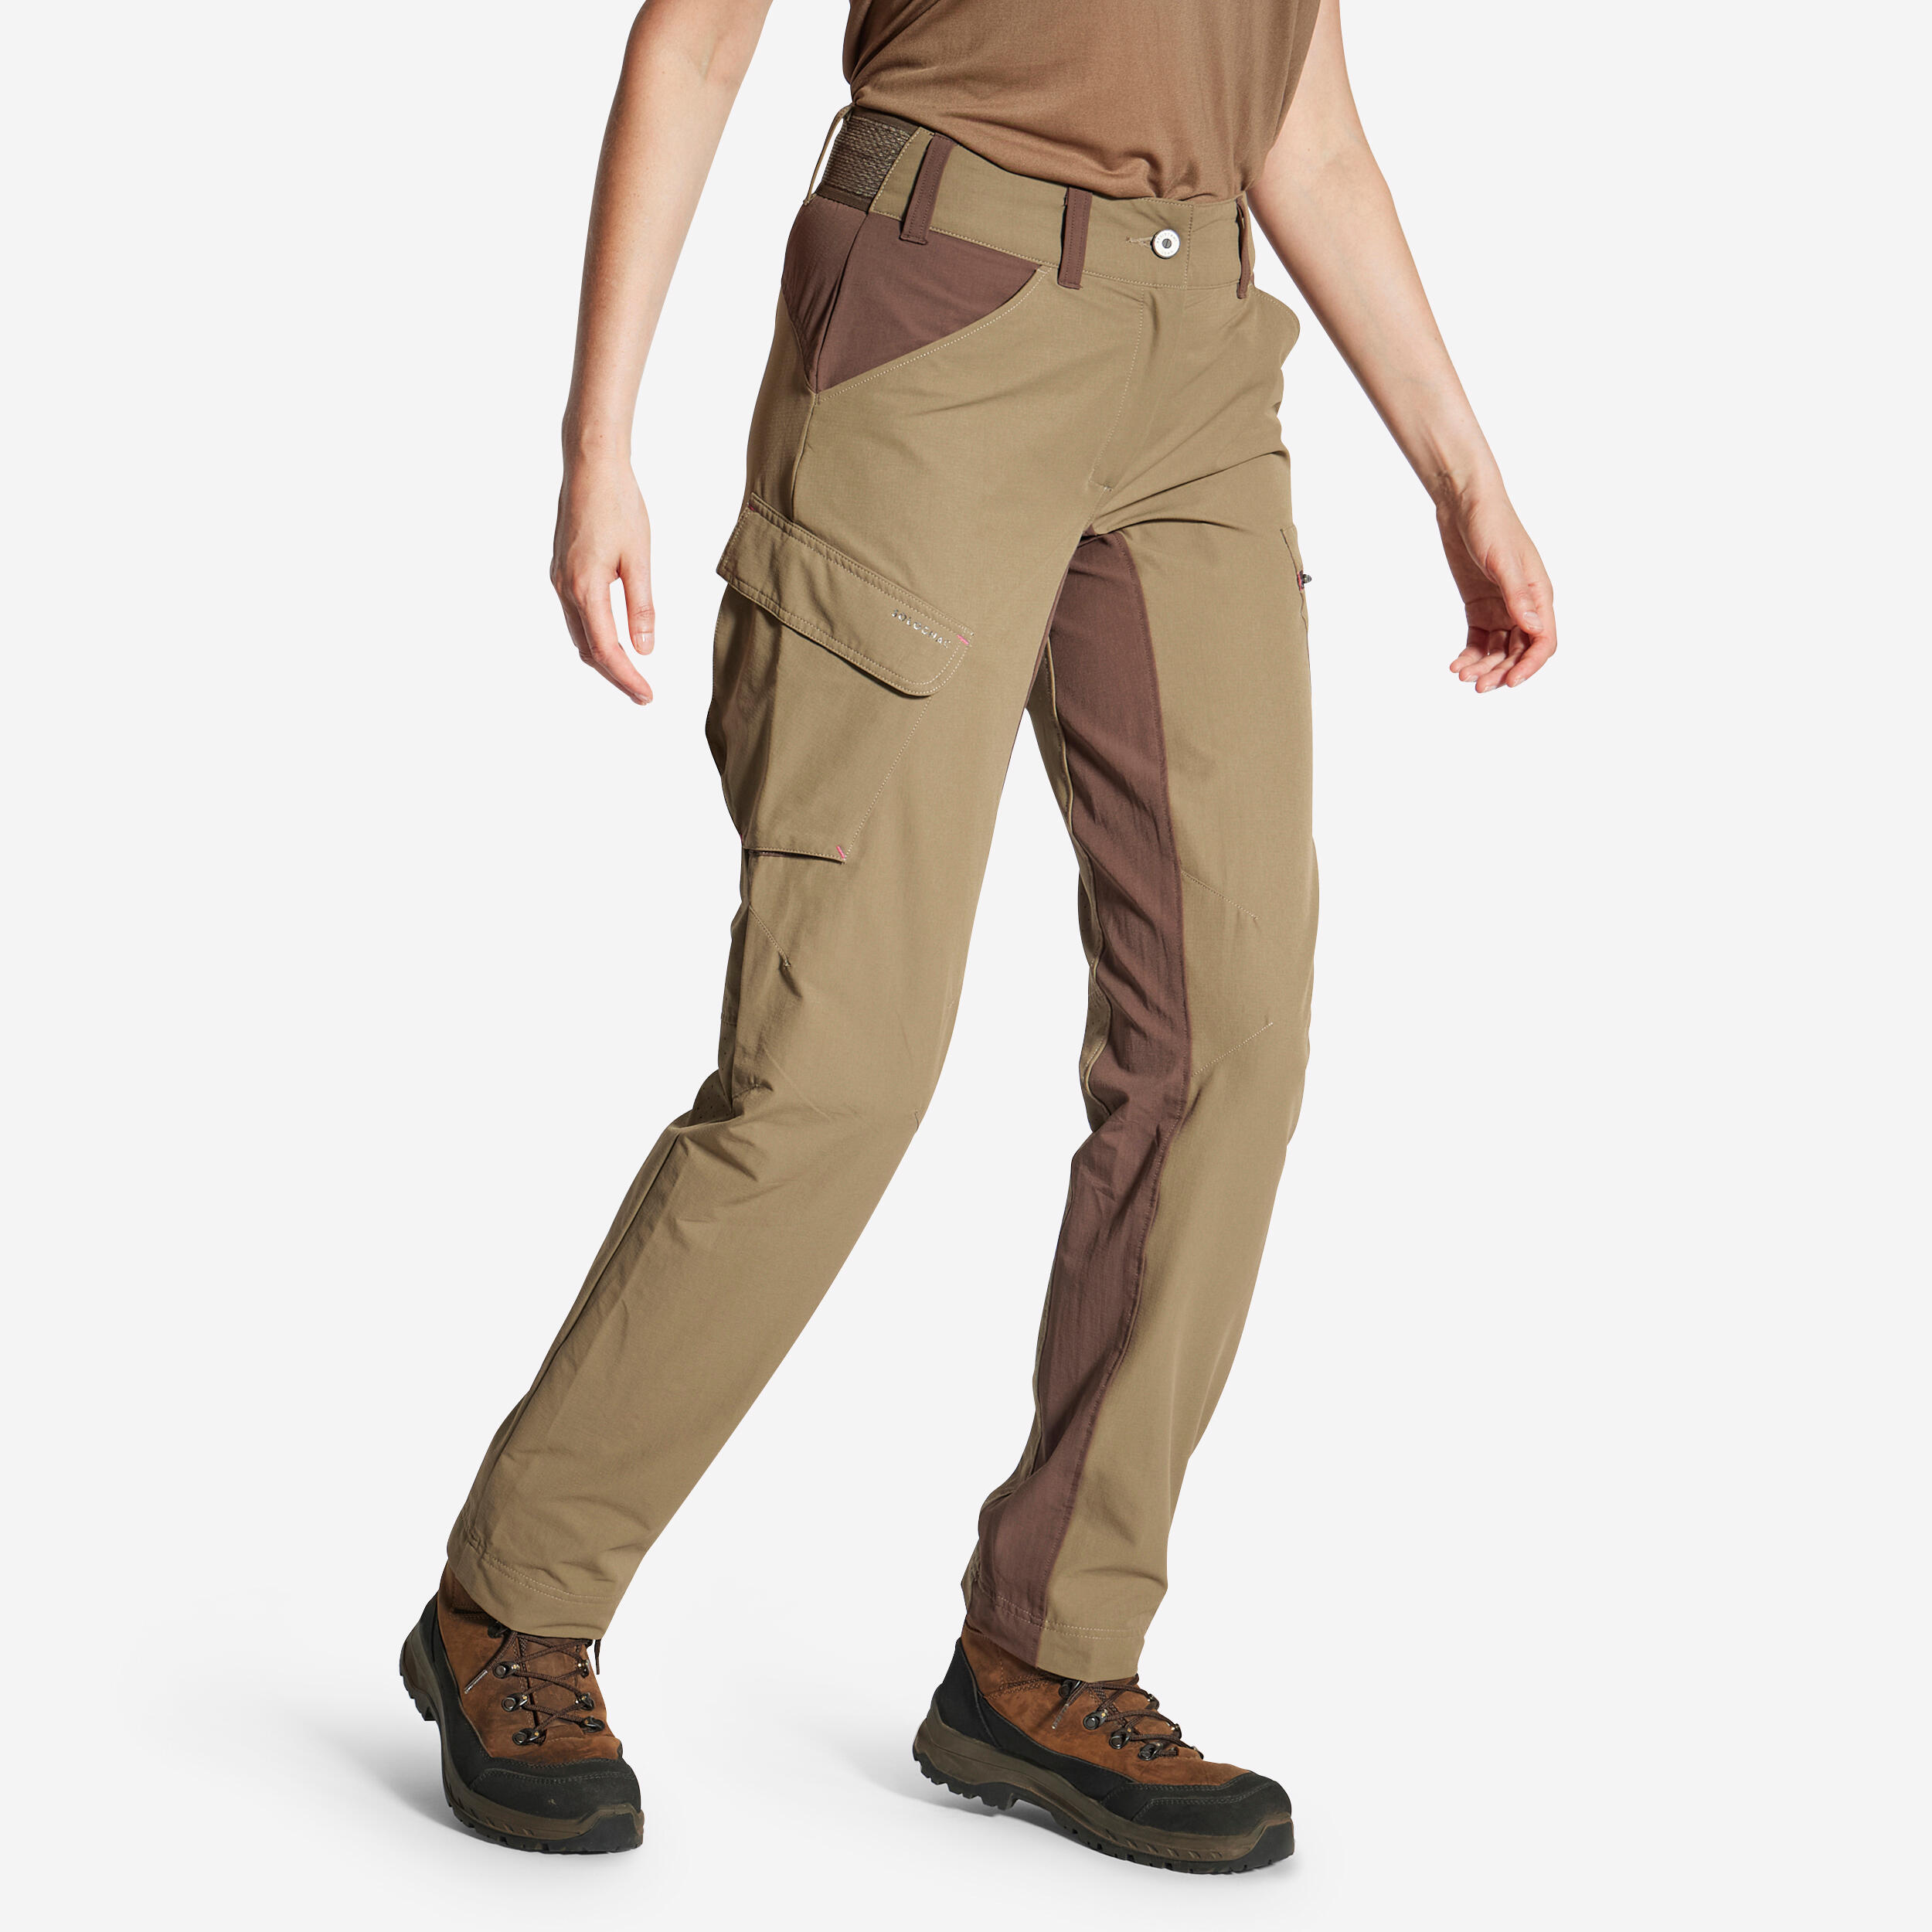 WOMEN'S TROUSERS 500 LIGHTWEIGHT BREATHABLE BROWN 2/8